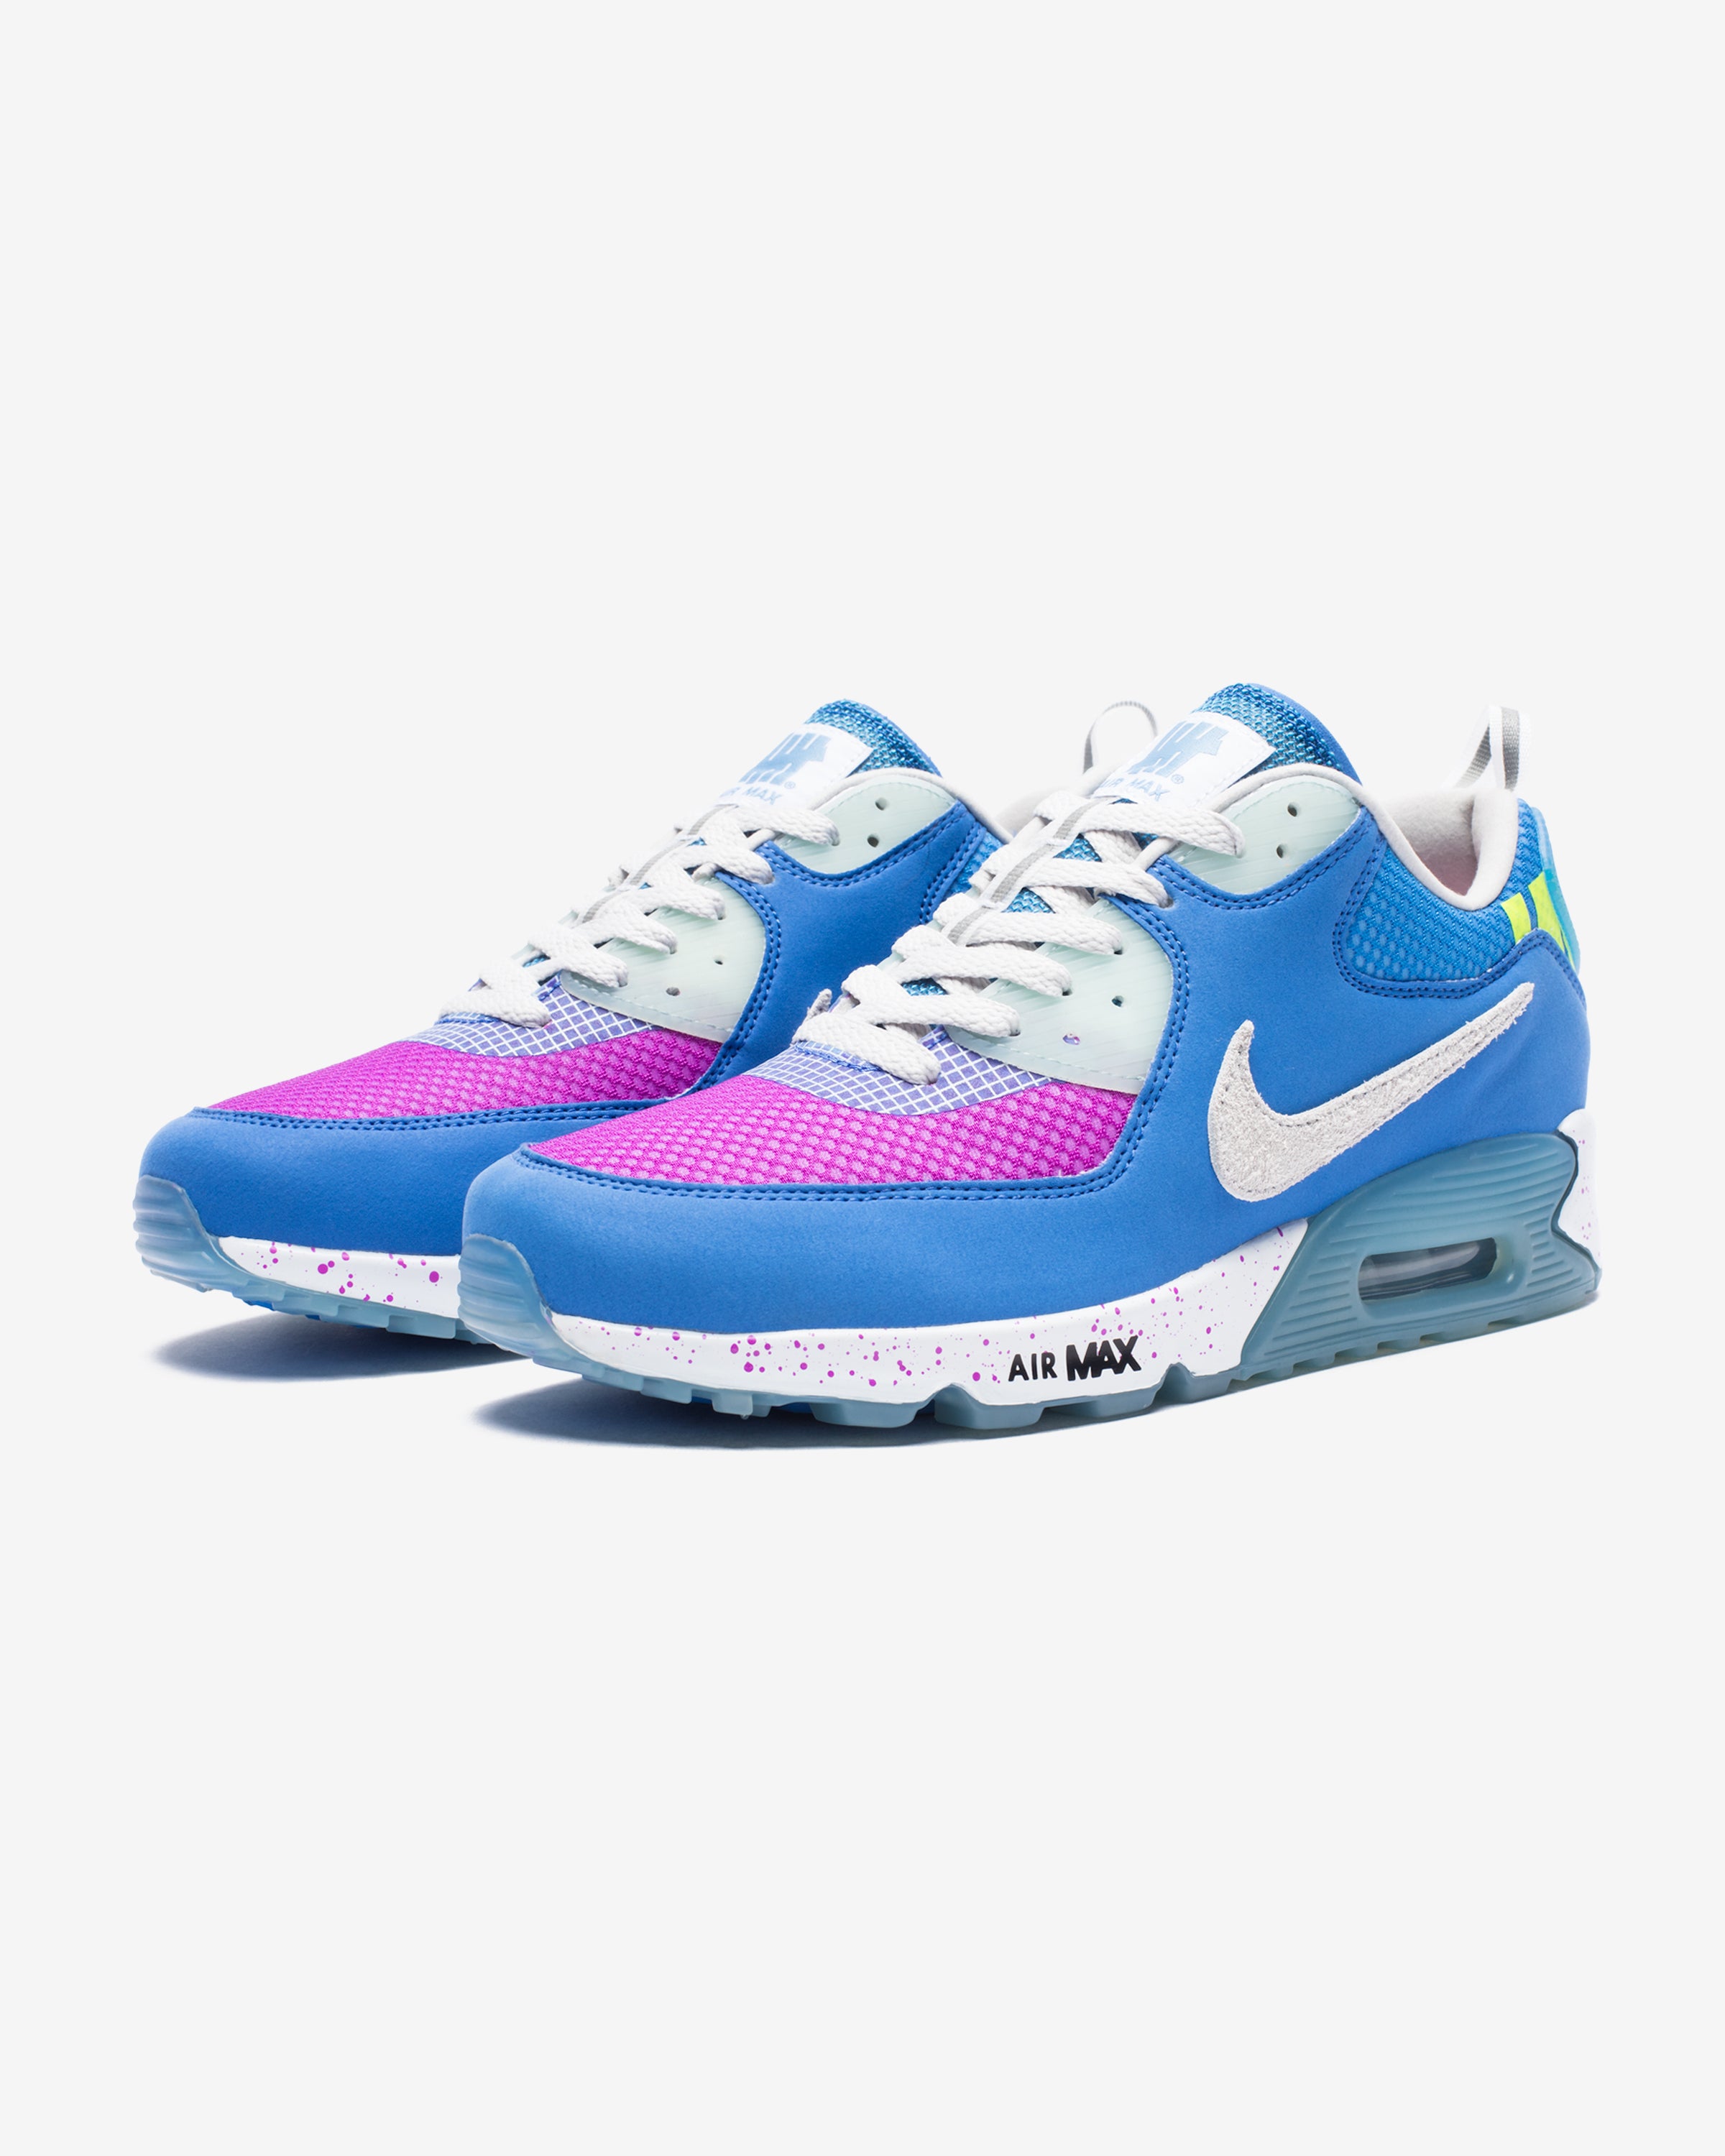 NIKE X UNDEFEATED AIR MAX 90 - PACIFICBLUE/ VIVIDPURPLE – Undefeated